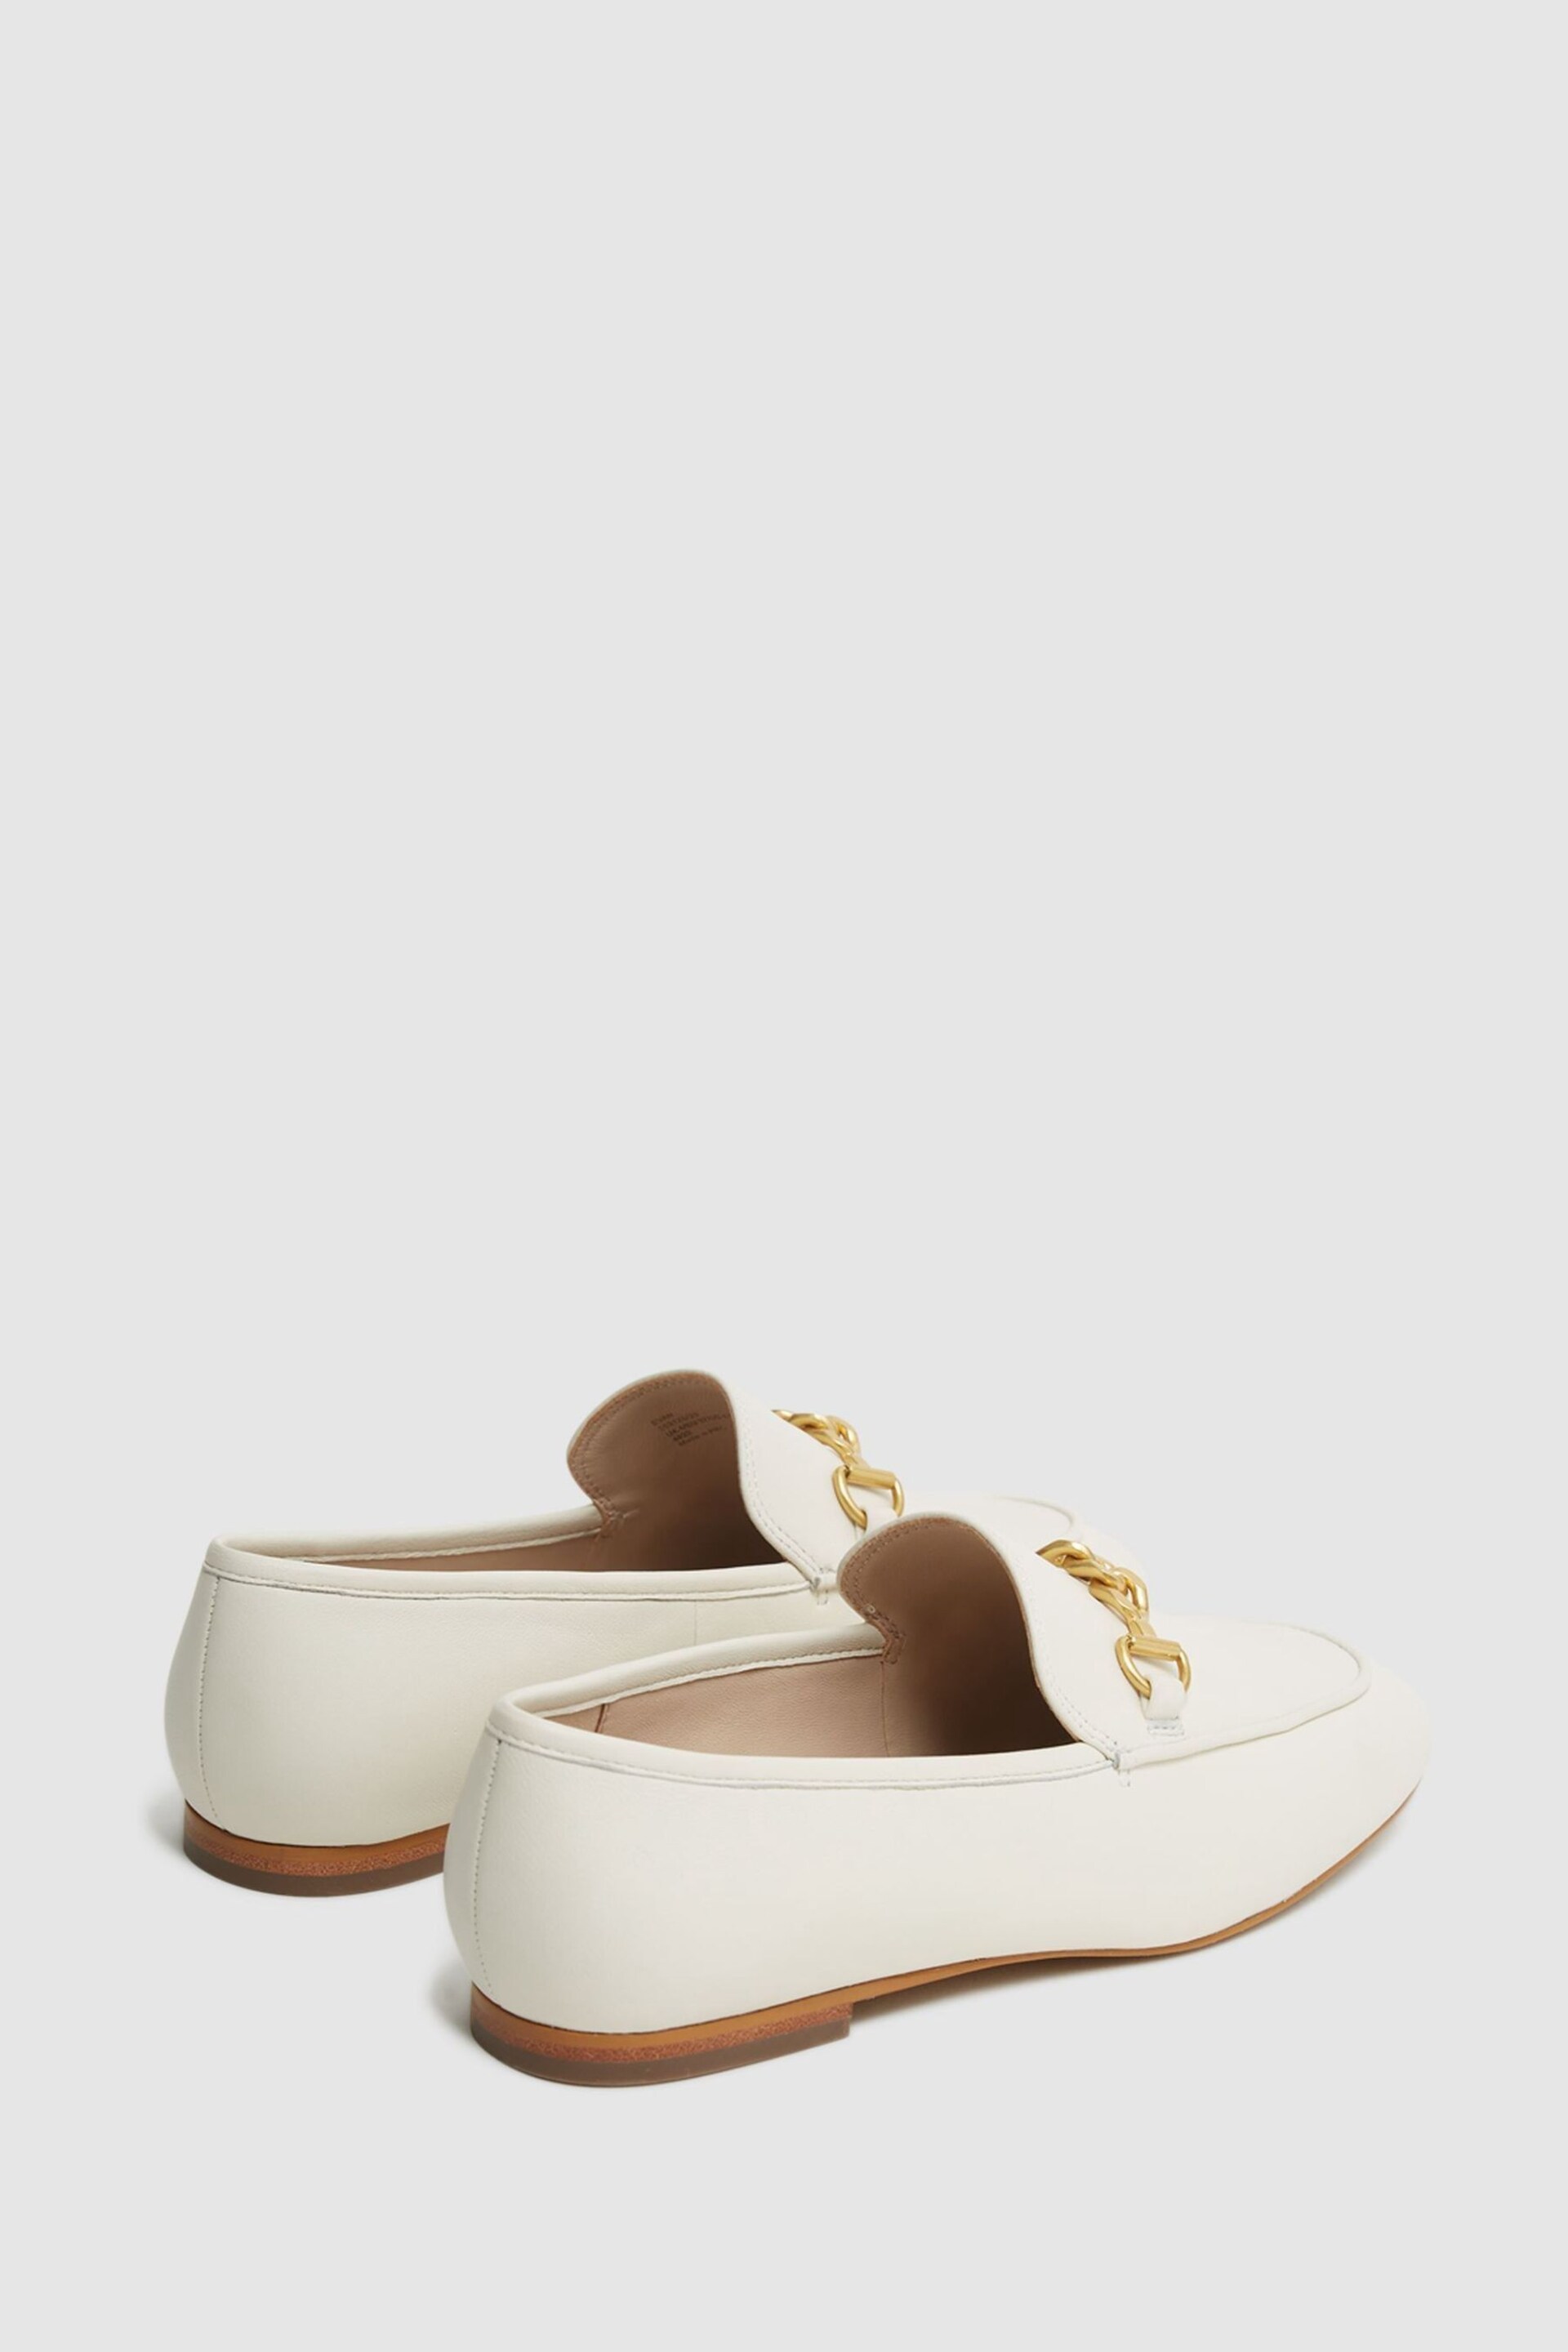 Reiss Off White Evan Chain Detail Loafers - Image 5 of 6